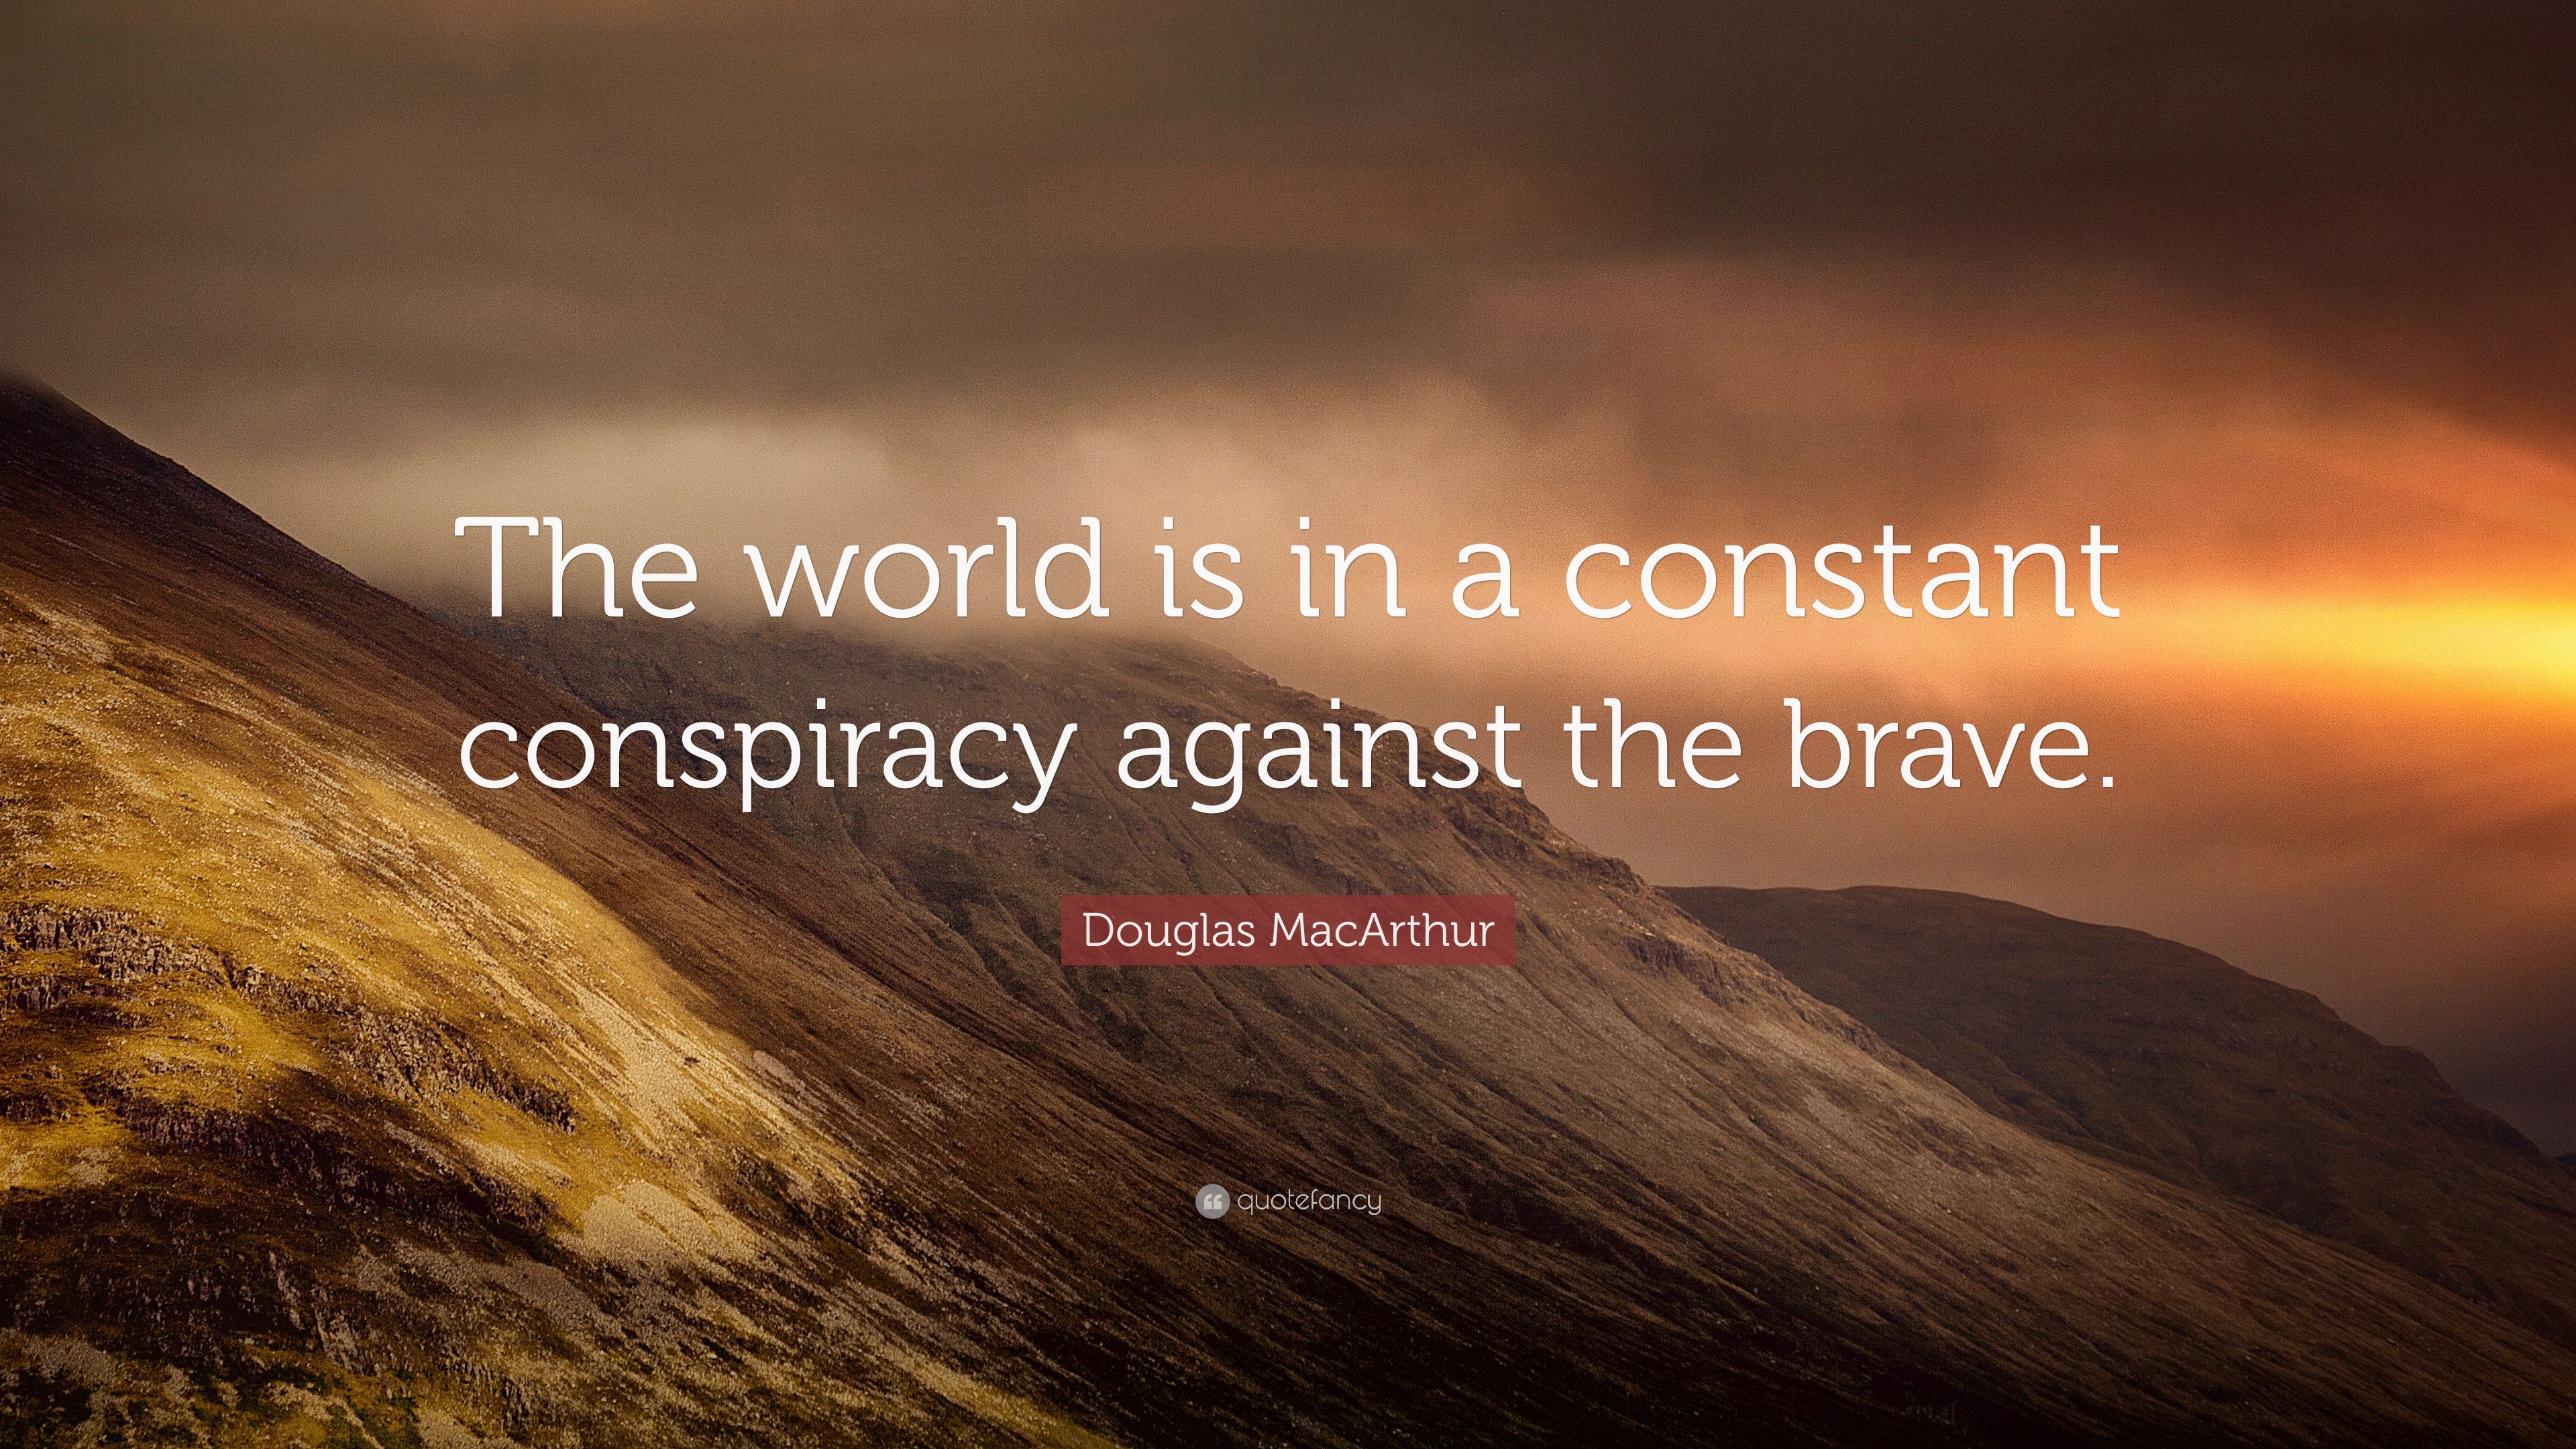 Douglas MacArthur Quote: “The world is in a constant conspiracy